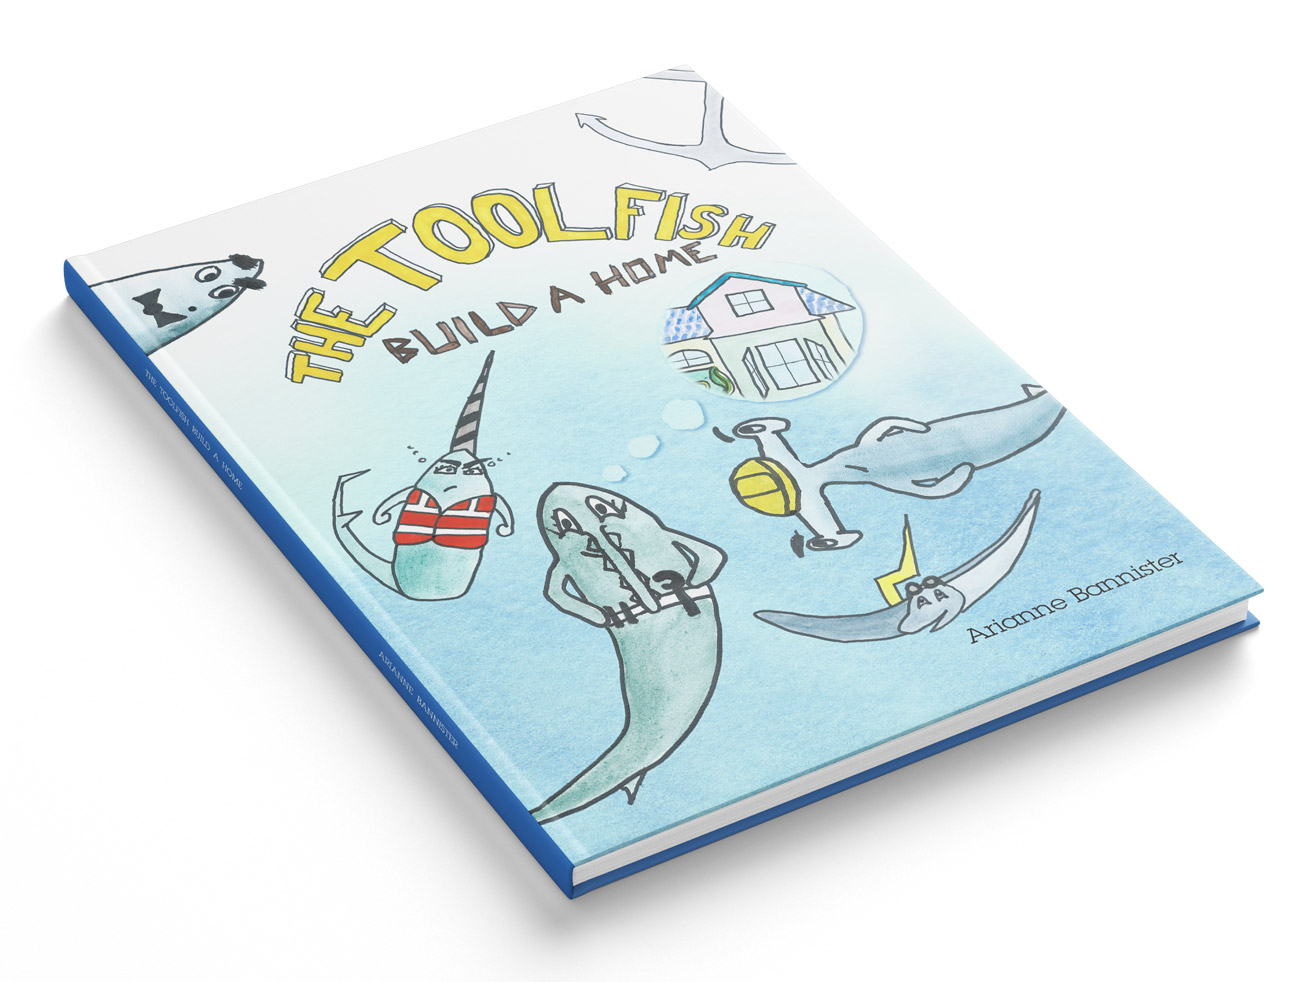 Children's book, The Toolfish build a home